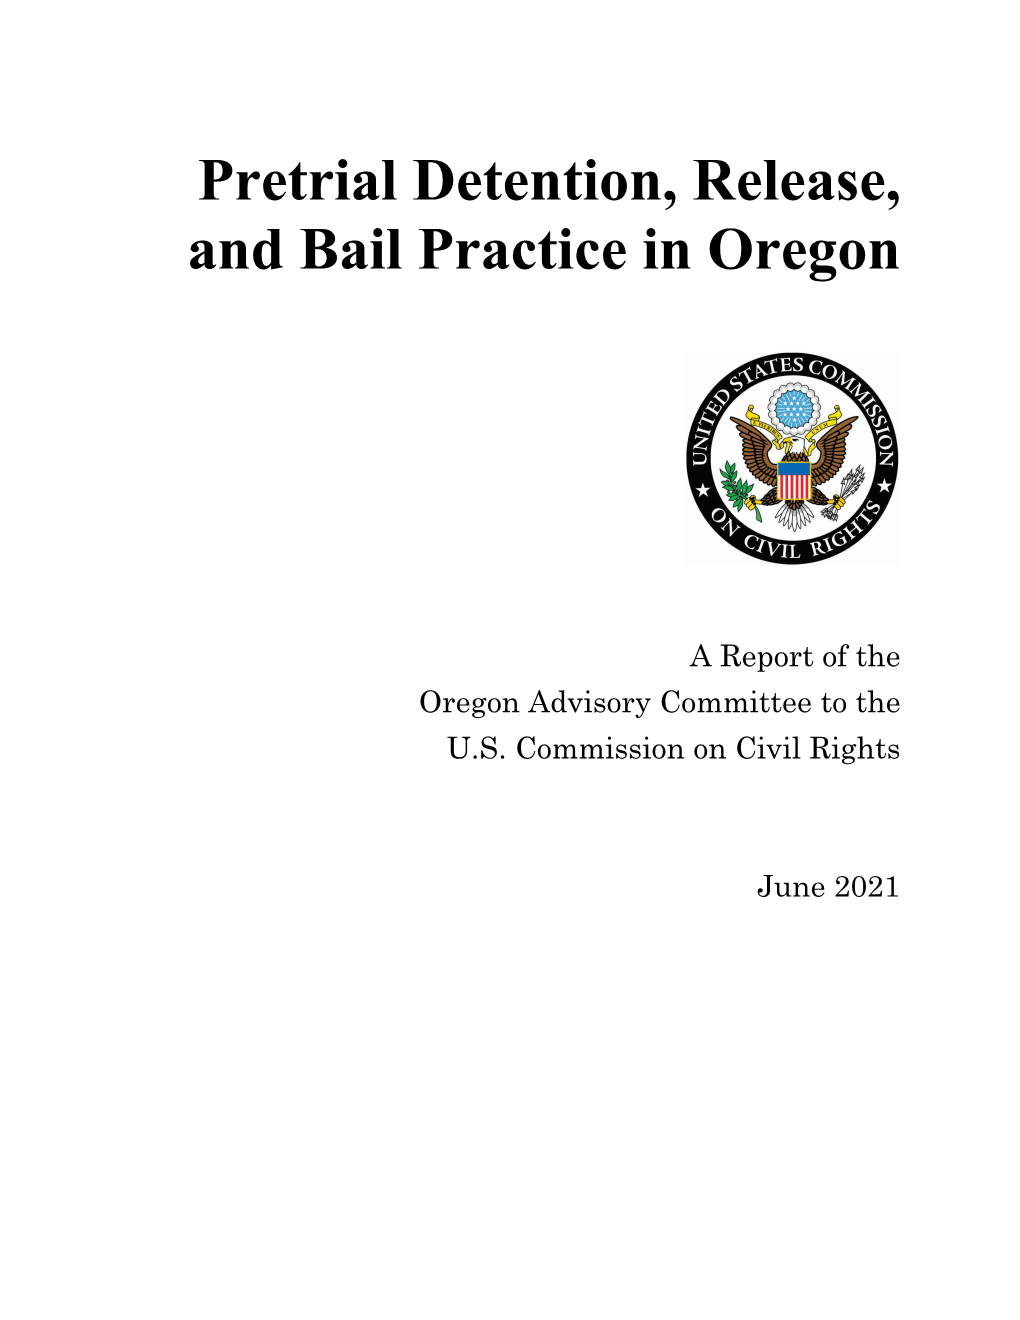 Pretrial Detention, Release, and Bail Practice in Oregon (2021)